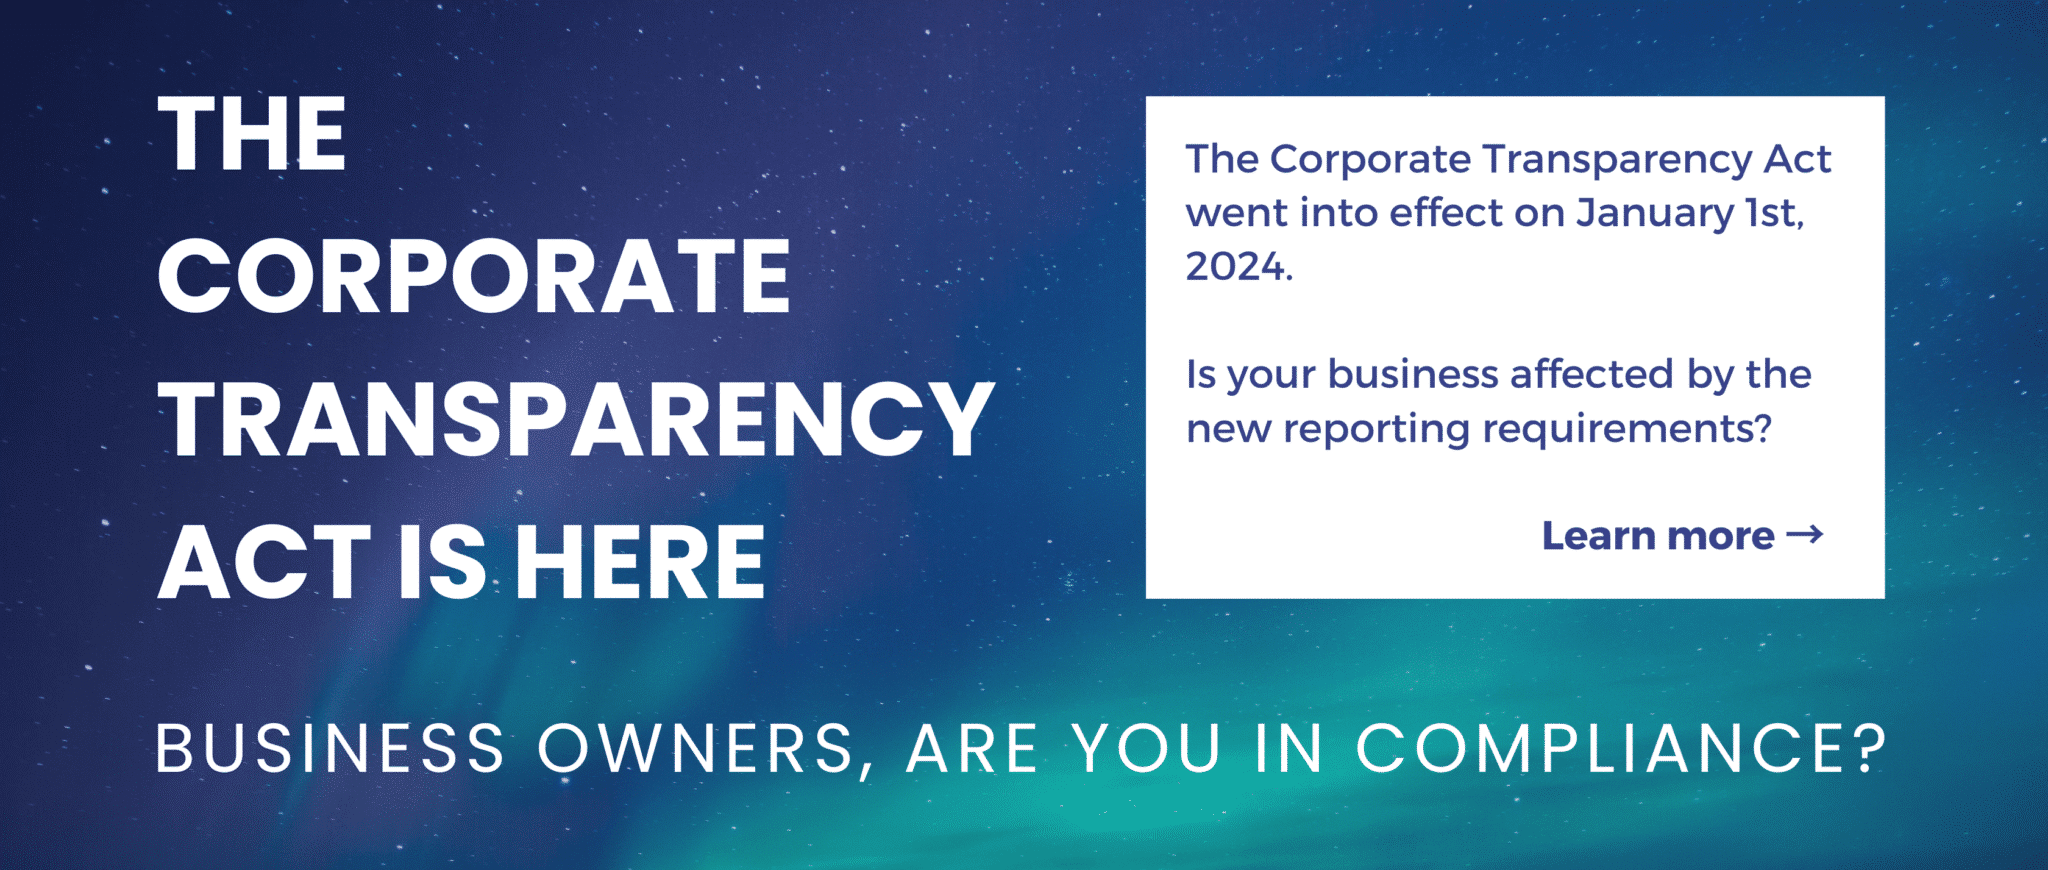 The Corporate Transparency Act Is Here. Is Your Business Affected? Learn more